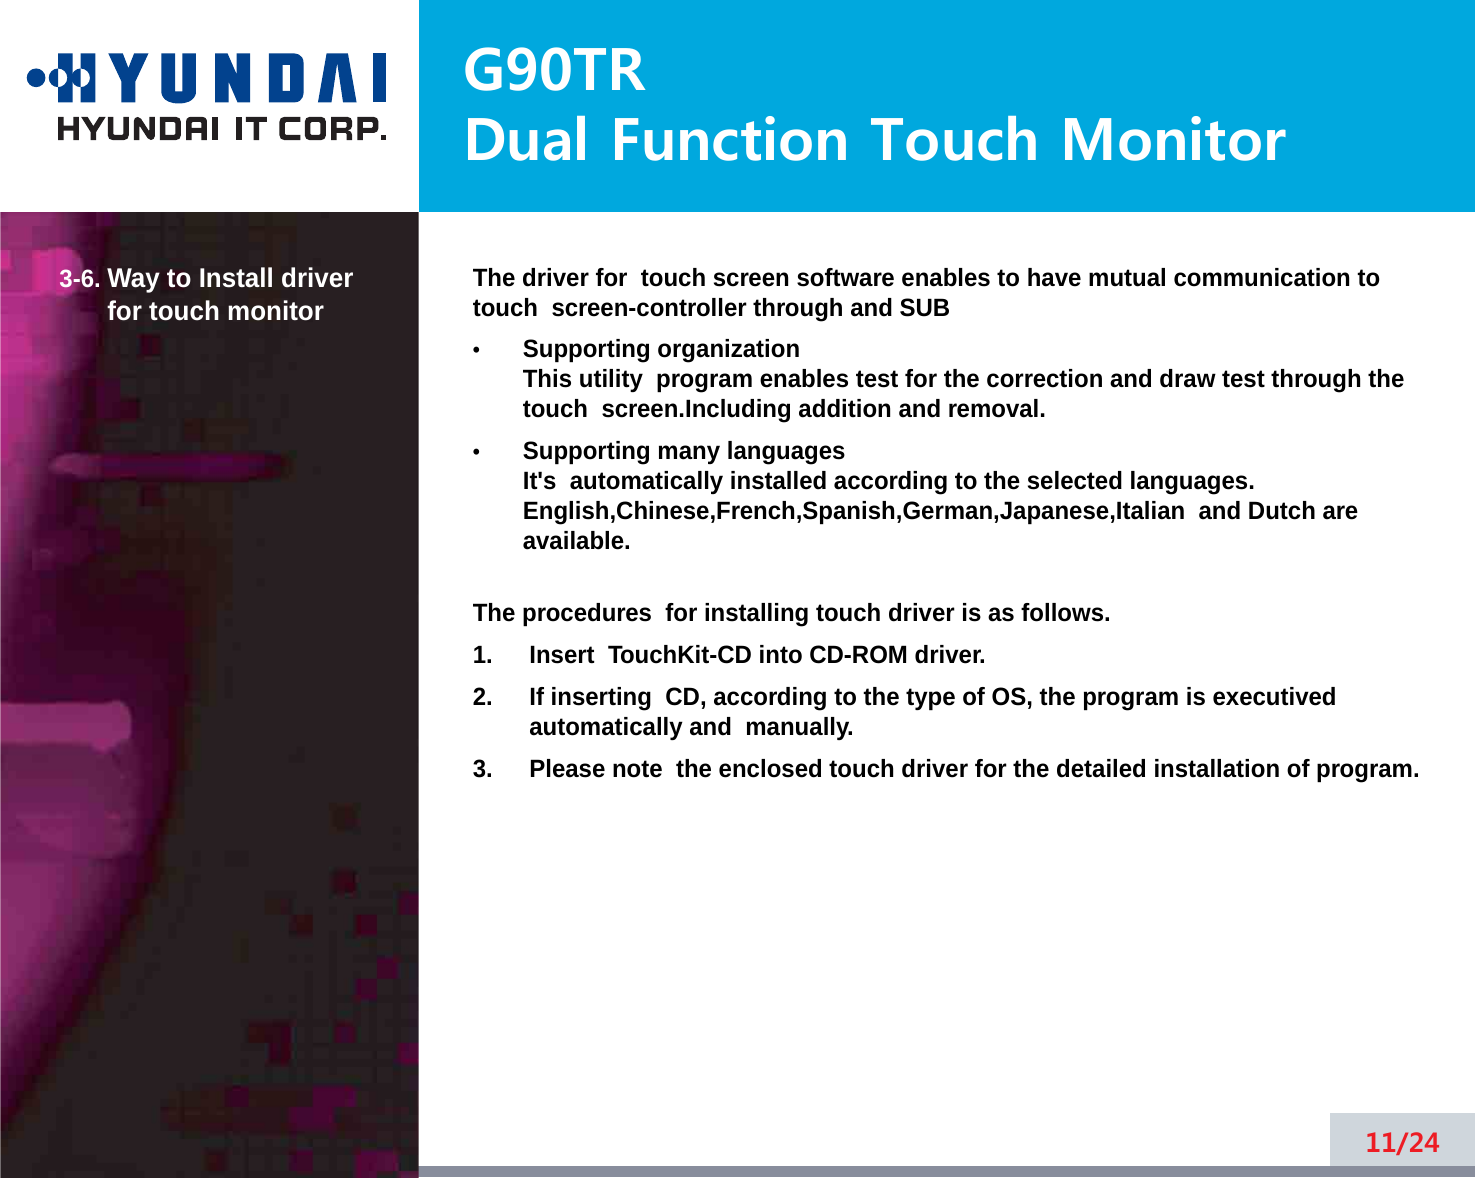 G90TRDual Function Touch Monitor3-6. Way to Install driverfor touch monitor The driver for  touch screen software enables to have mutual communication totouch  screen-controller through and SUB•Supporting organizationThis utility  program enables test for the correction and draw test through thetouch  screen.Including addition and removal.•Supporting many languagesIt&apos;s  automatically installed according to the selected languages.English,Chinese,French,Spanish,German,Japanese,Italian  and Dutch areavailable.The procedures  for installing touch driver is as follows.1. Insert  TouchKit-CD into CD-ROM driver.2. If inserting  CD, according to the type of OS, the program is executivedautomatically and  manually. 3. Please note  the enclosed touch driver for the detailed installation of program.11/24